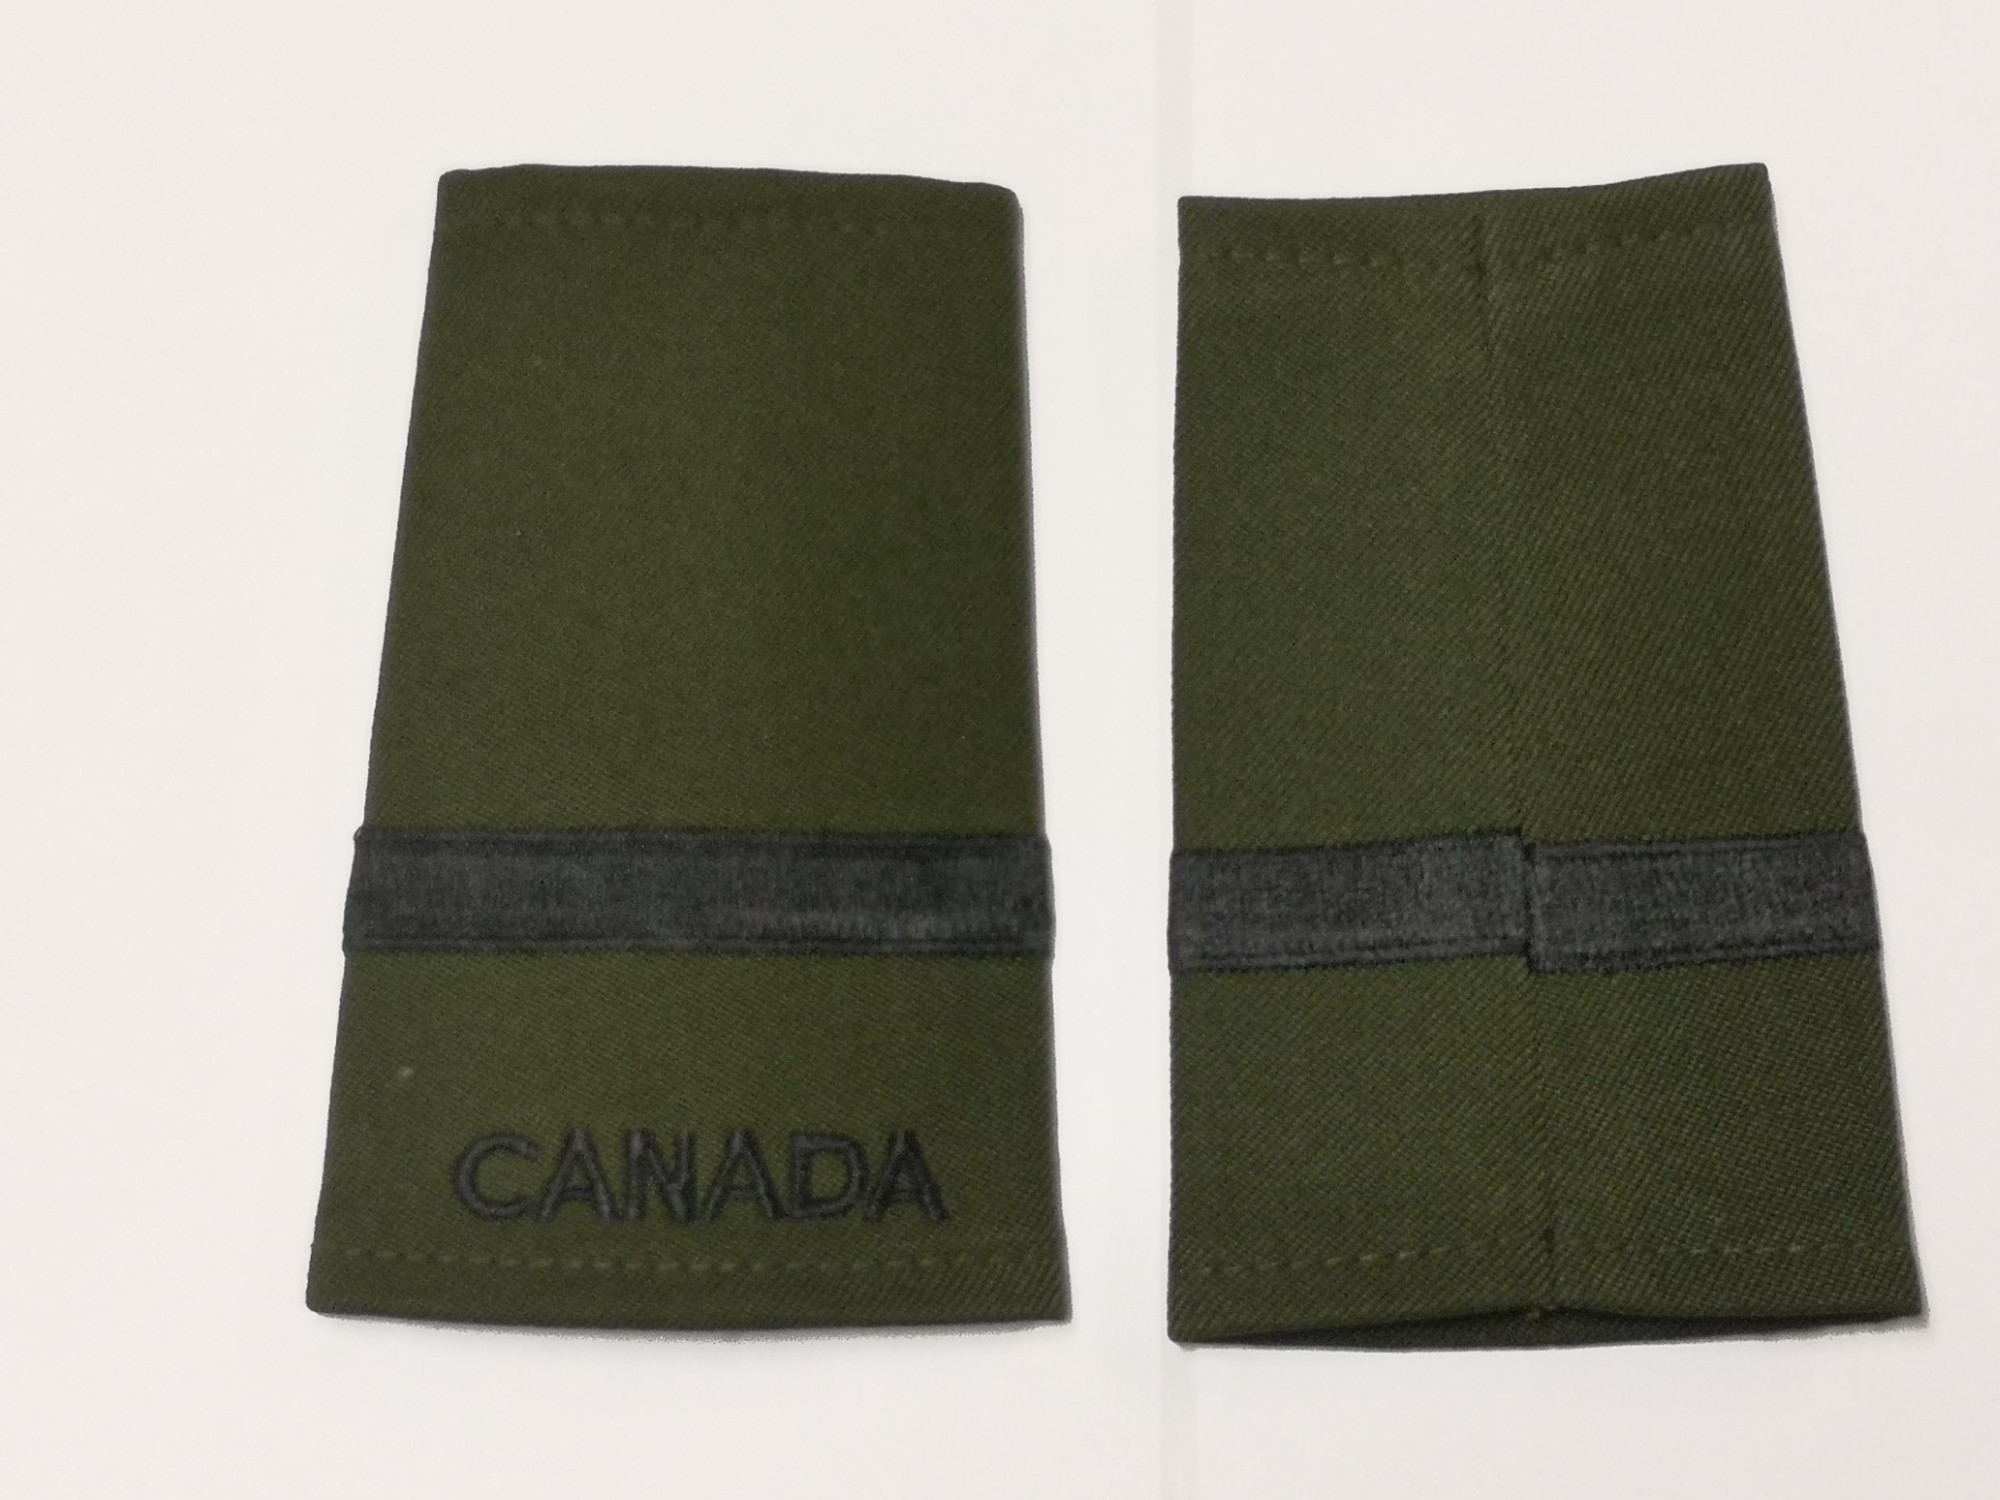 Canadian Armed Forces Green Rank Epaulets Navy - Acting Sub-Lieutenant